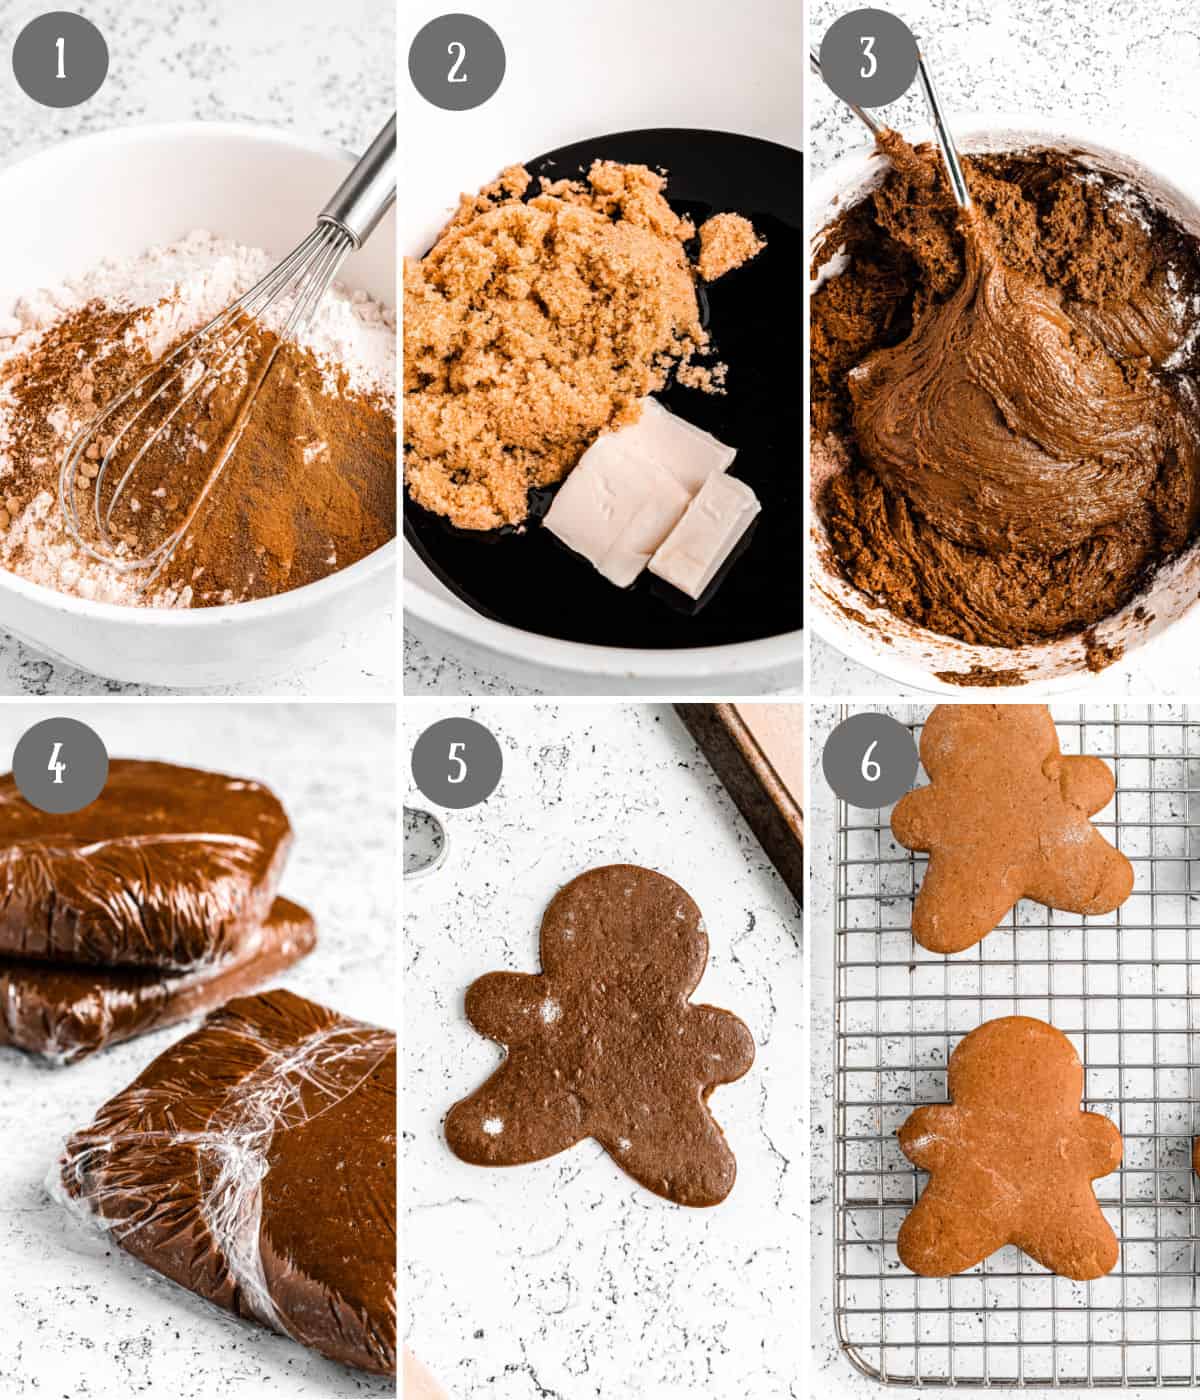 Six process photos. First one, the dry ingredients mixed in a bowl. Second one, the wet ingredients mixed in a bowl. Third one, the dough all mixed together. Fourth one, the dough wrapped in plastic wrap and ready to chill. Fifth one, a gingerbread man that has been cut out with a cutter. Sixth one, the baked cookie and placed on a cooling rack.